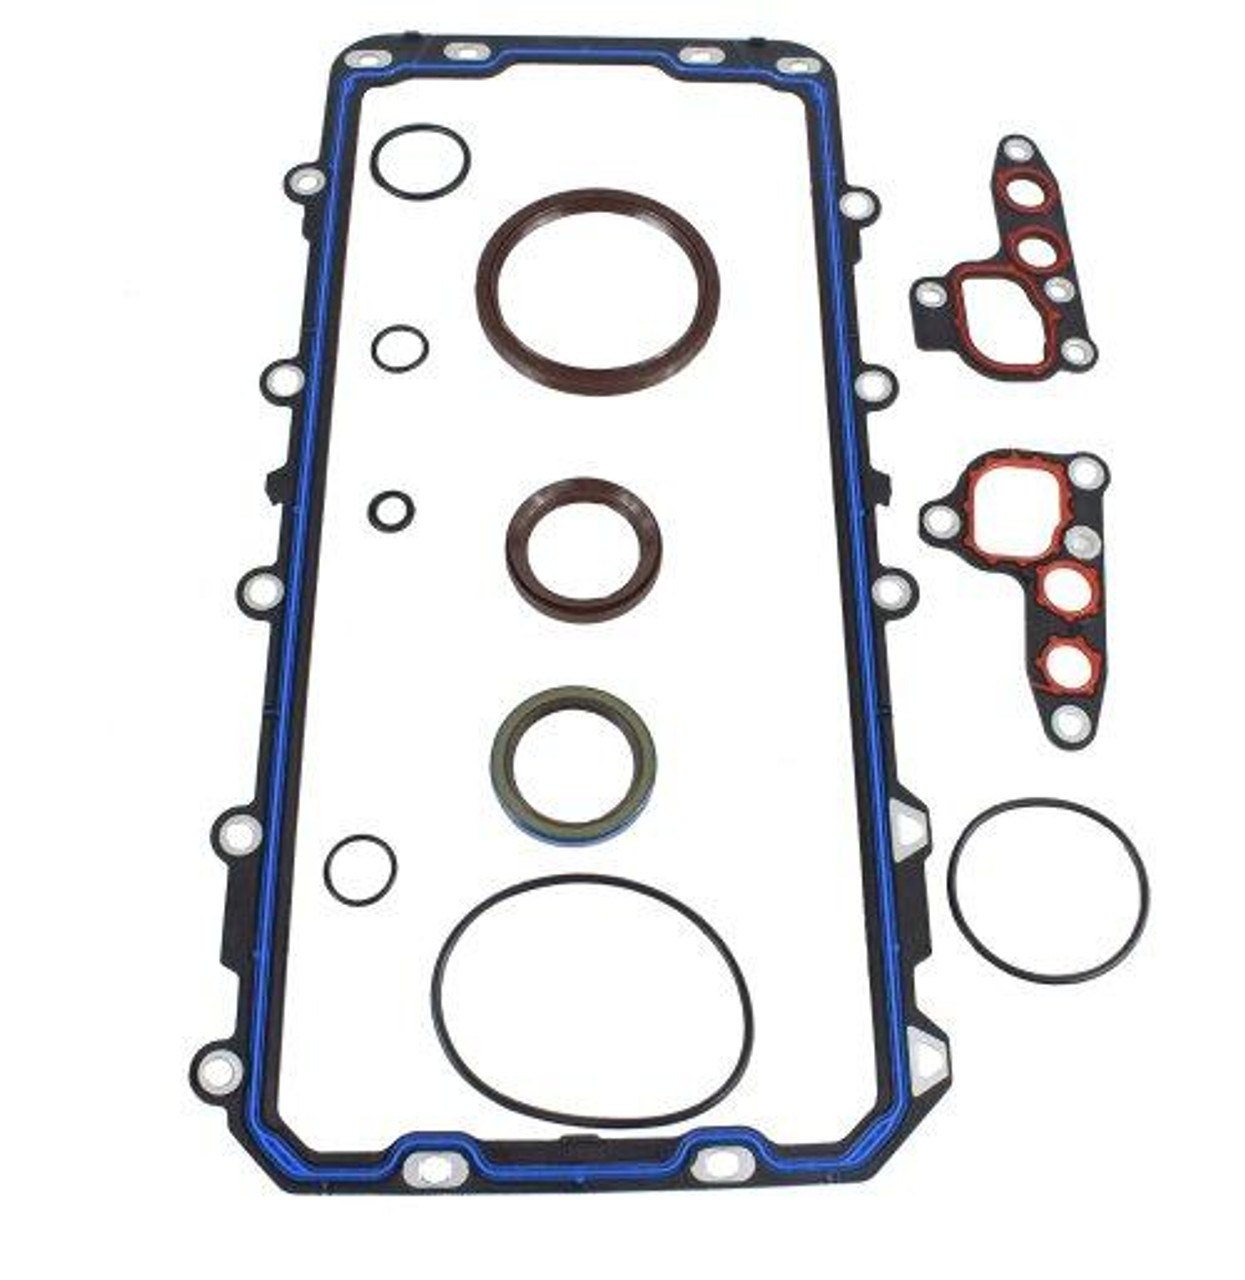 Lower Gasket Set - 2001 Ford Expedition 4.6L Engine Parts # LGS4150ZE154